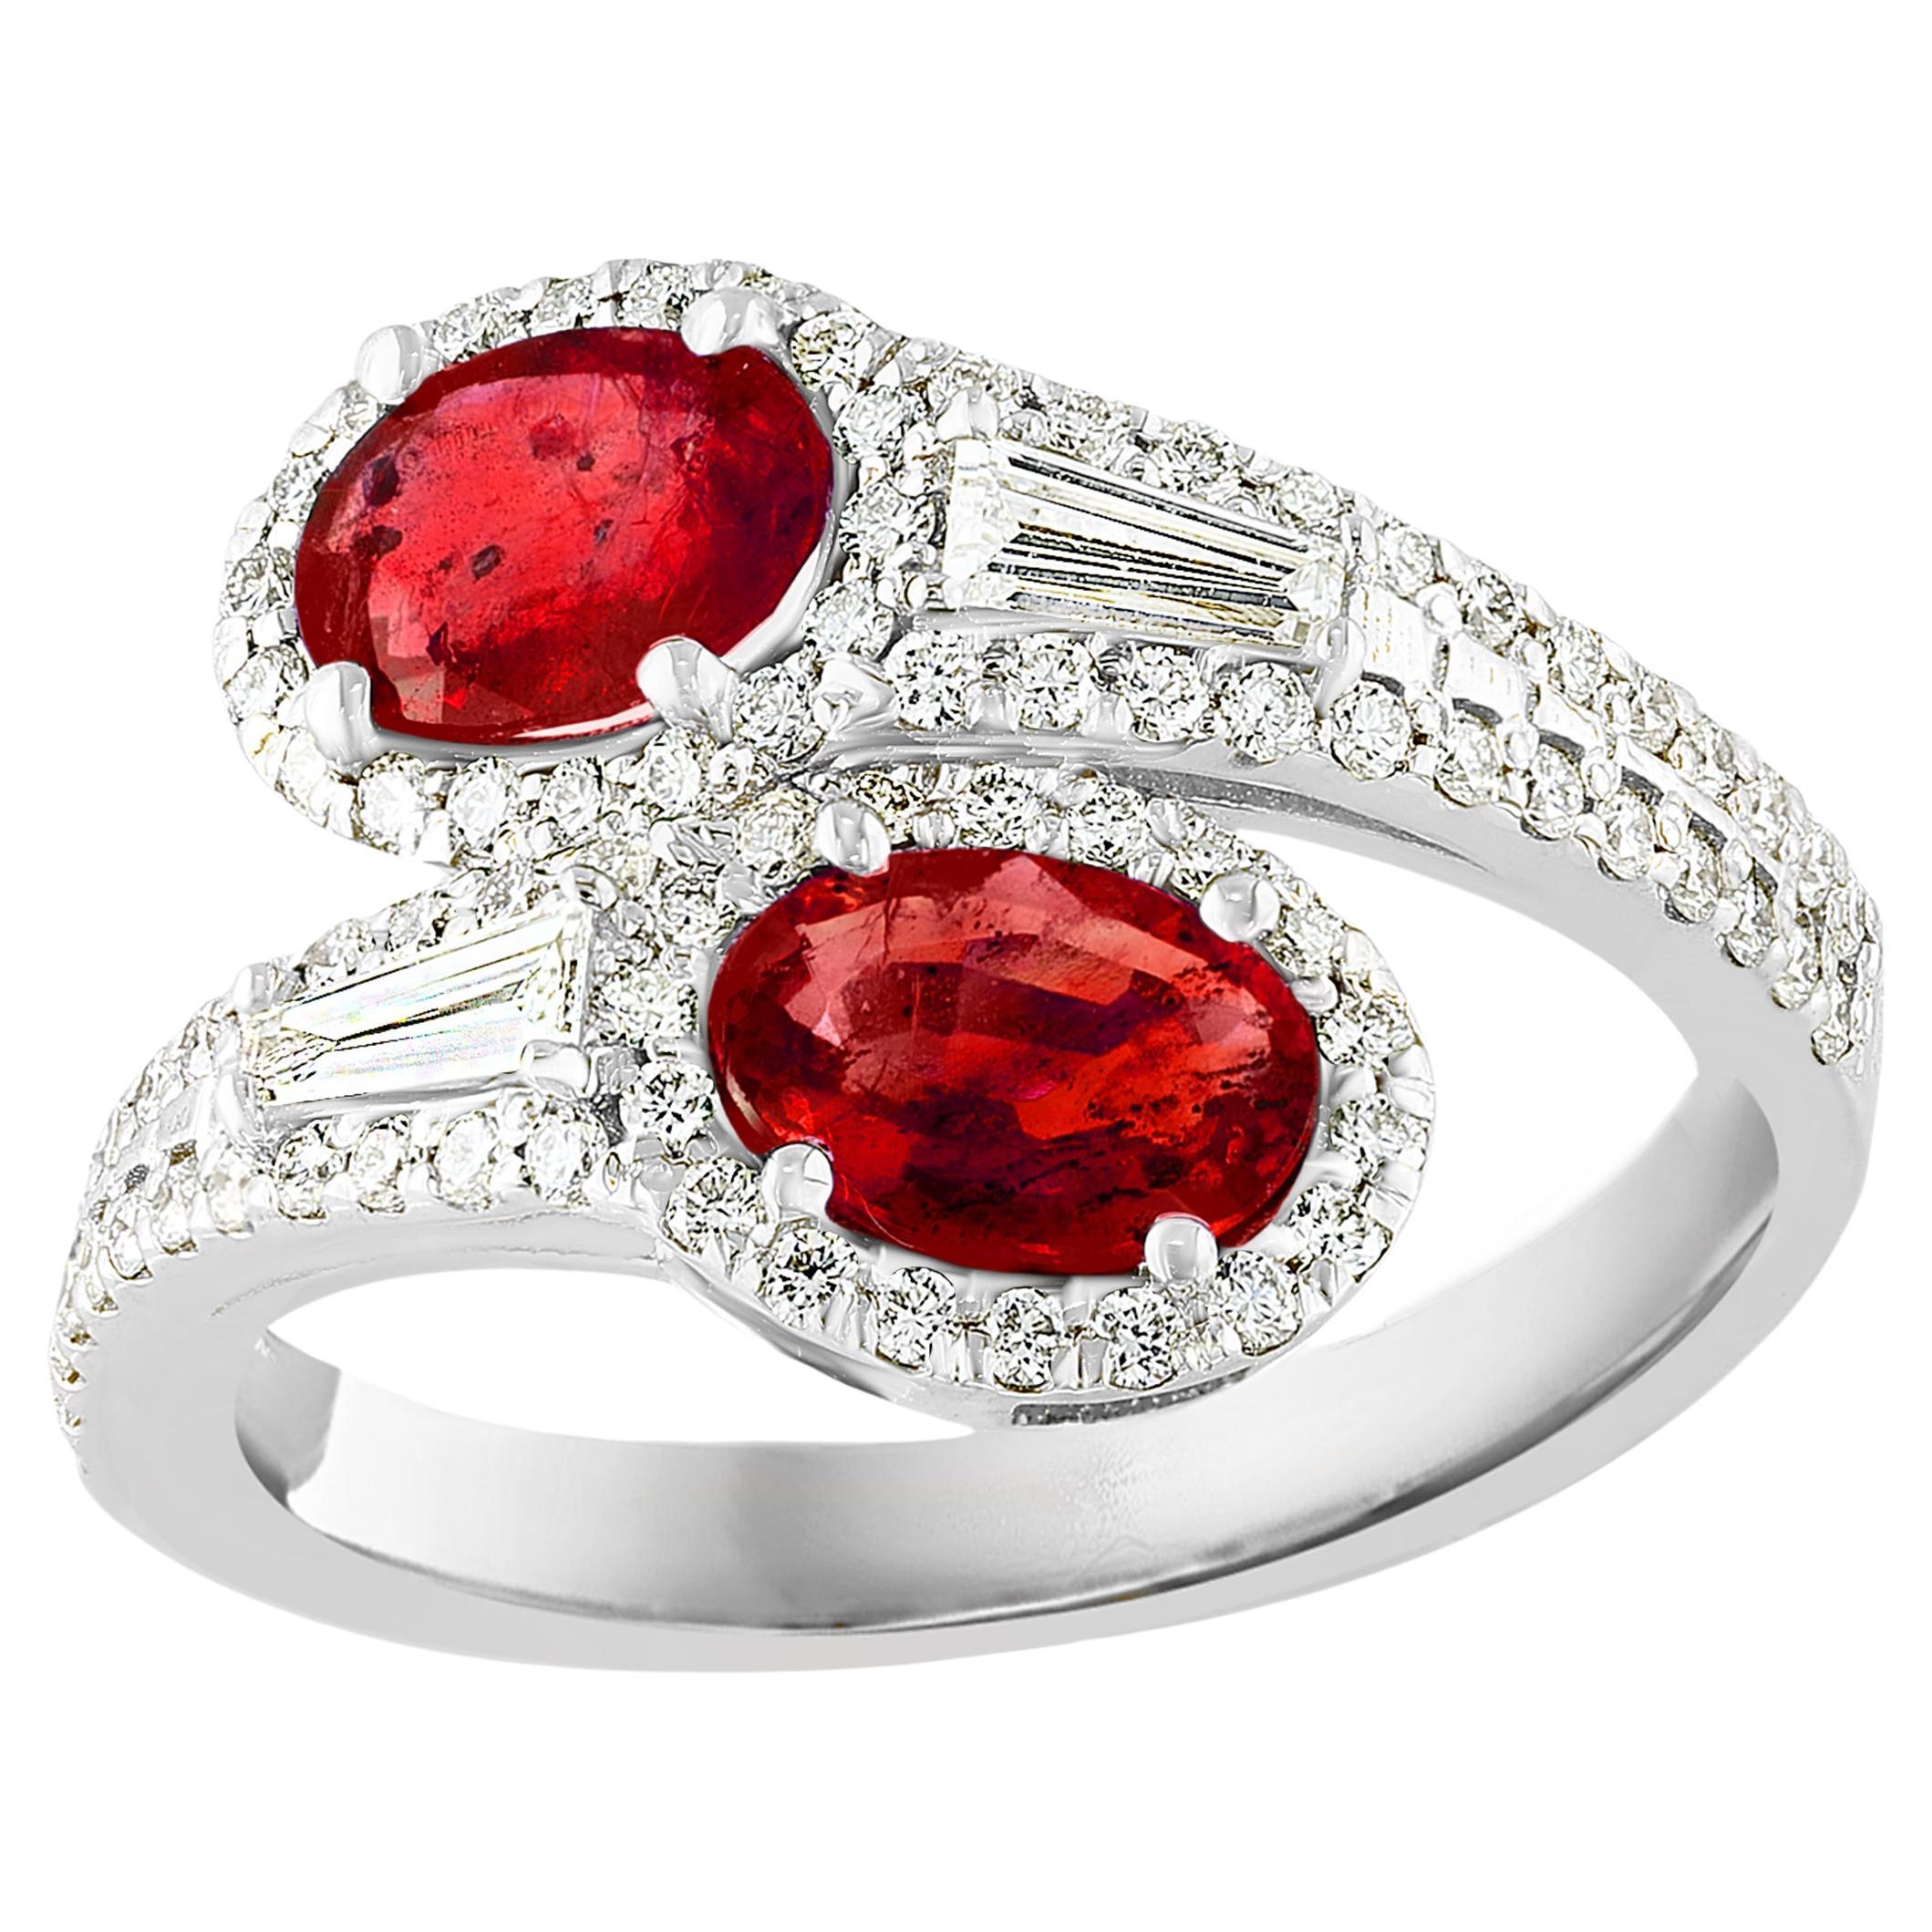 1.67 Carat Oval Cut Ruby Diamond Toi Et Moi Engagement Ring 14K White Gold For Sale